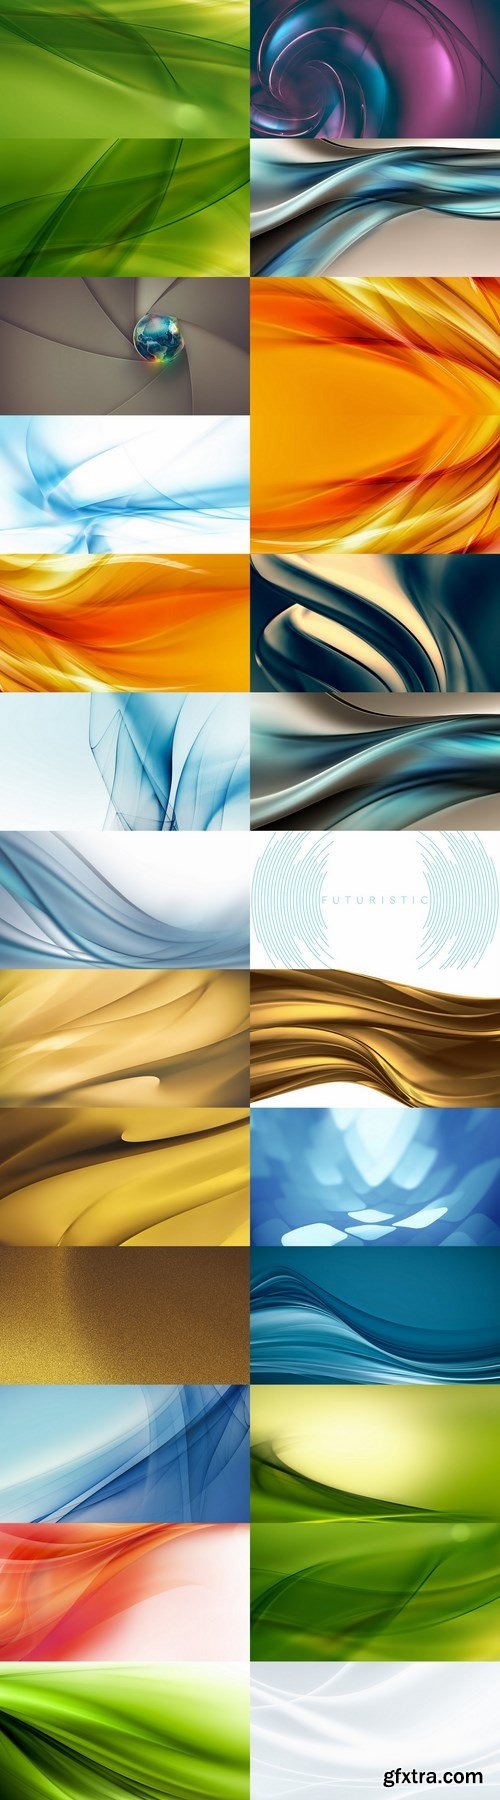 Abstract Backgrounds Bundle